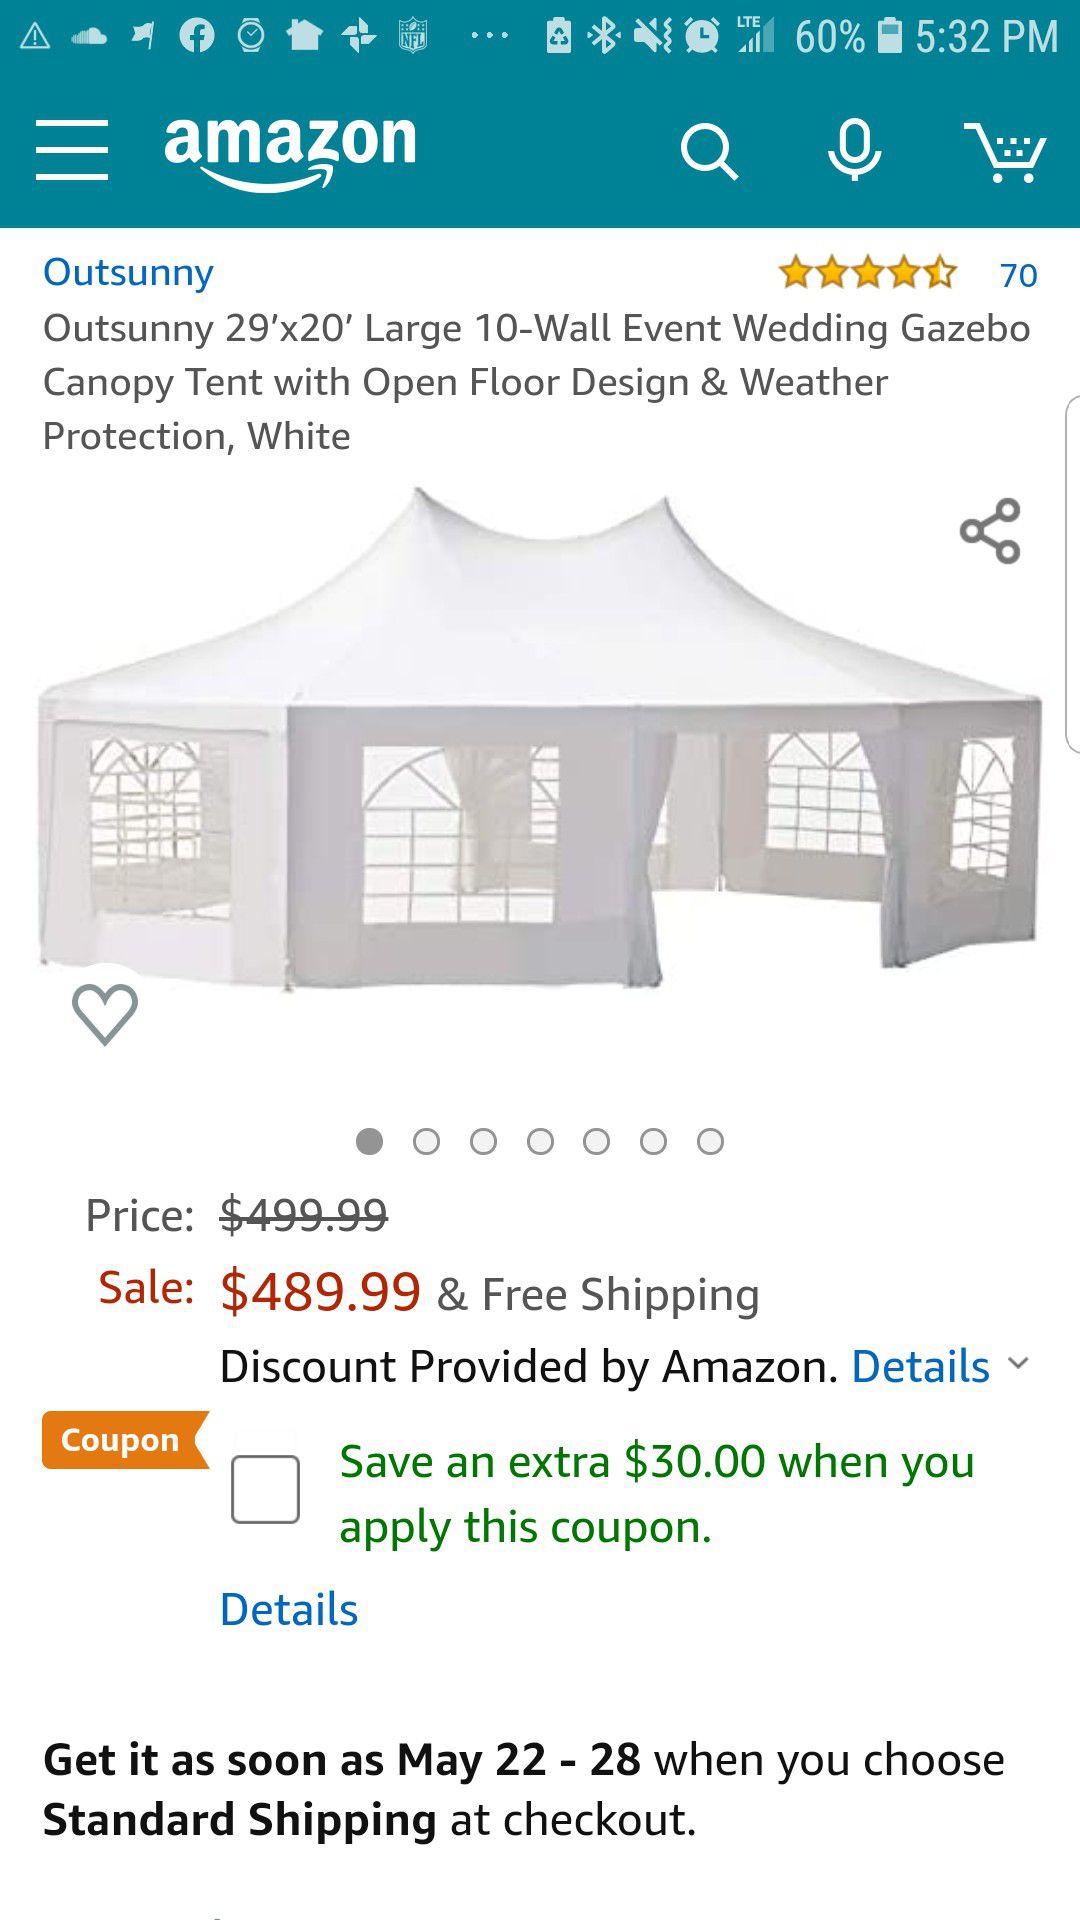 Outsunny 29' x 20' Large 10-Wall Event Wedding Reception Gazebo Canopy Tent - White